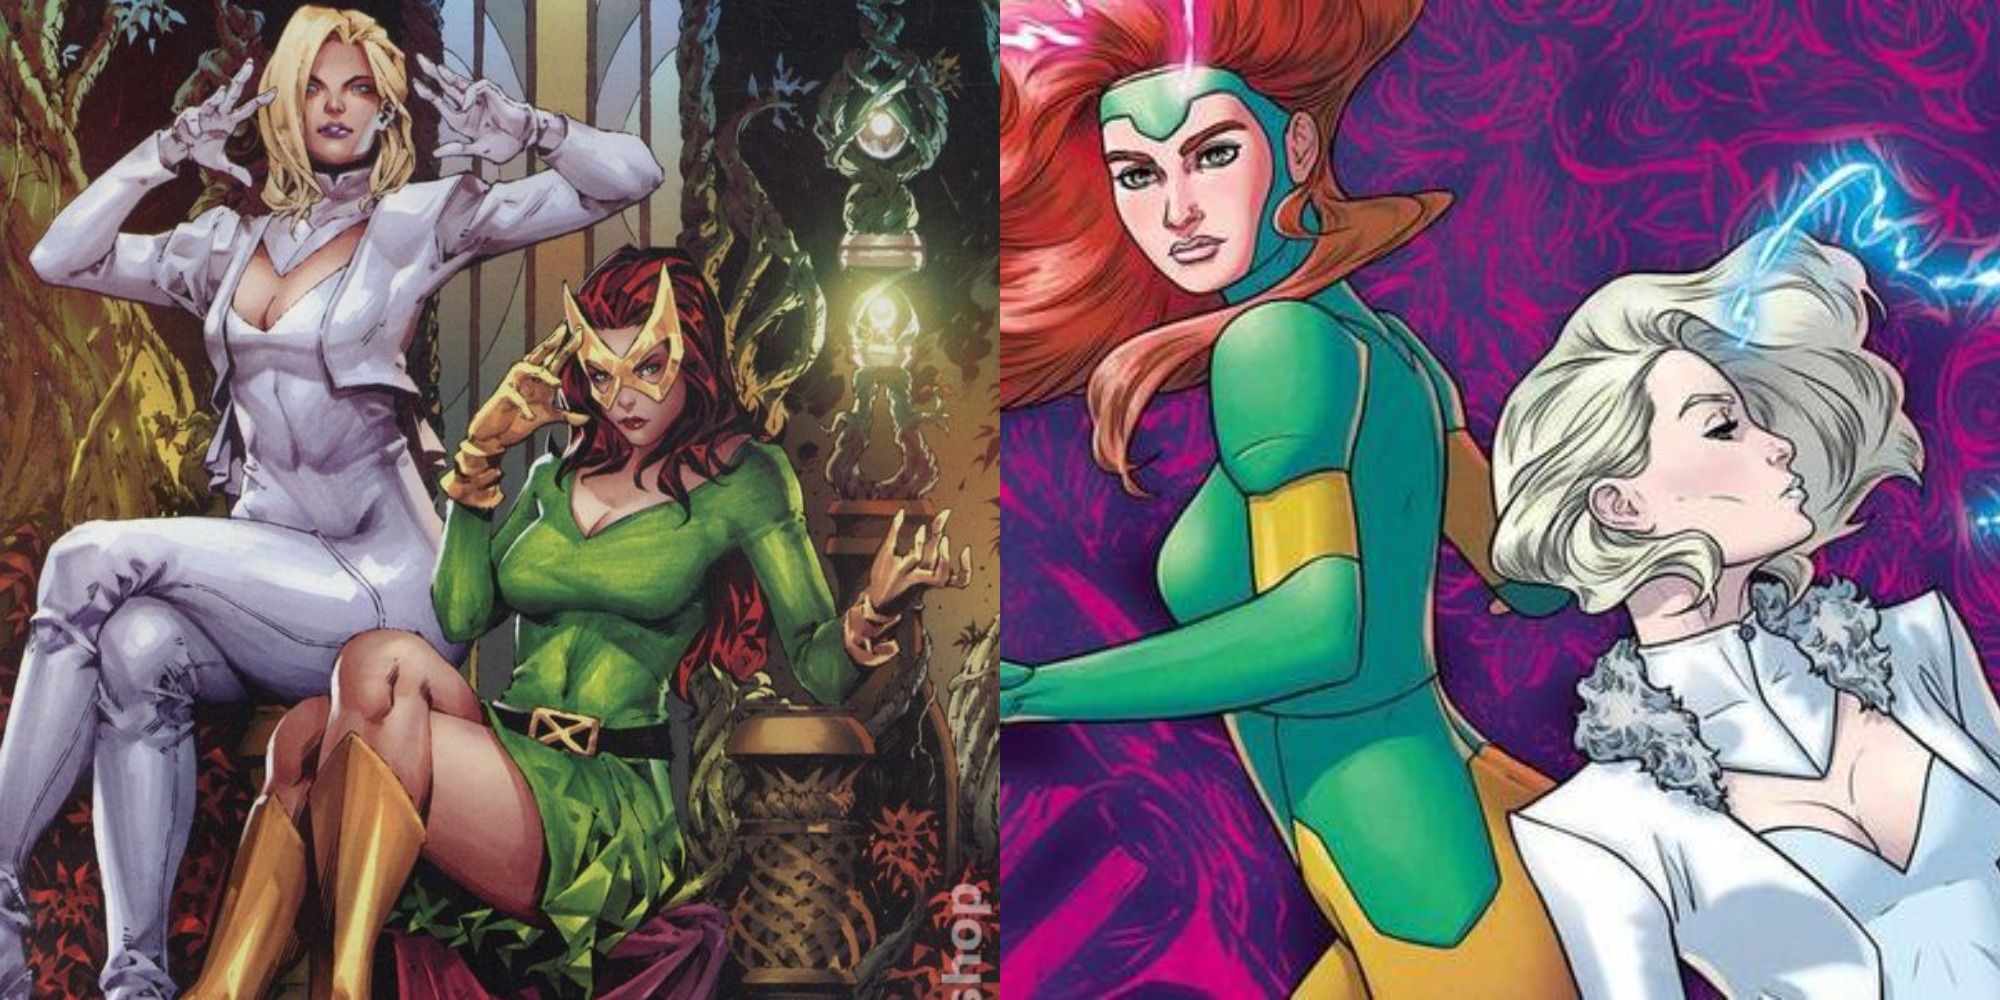 Split image showing Jean Grey and Emma Frost together in the comics